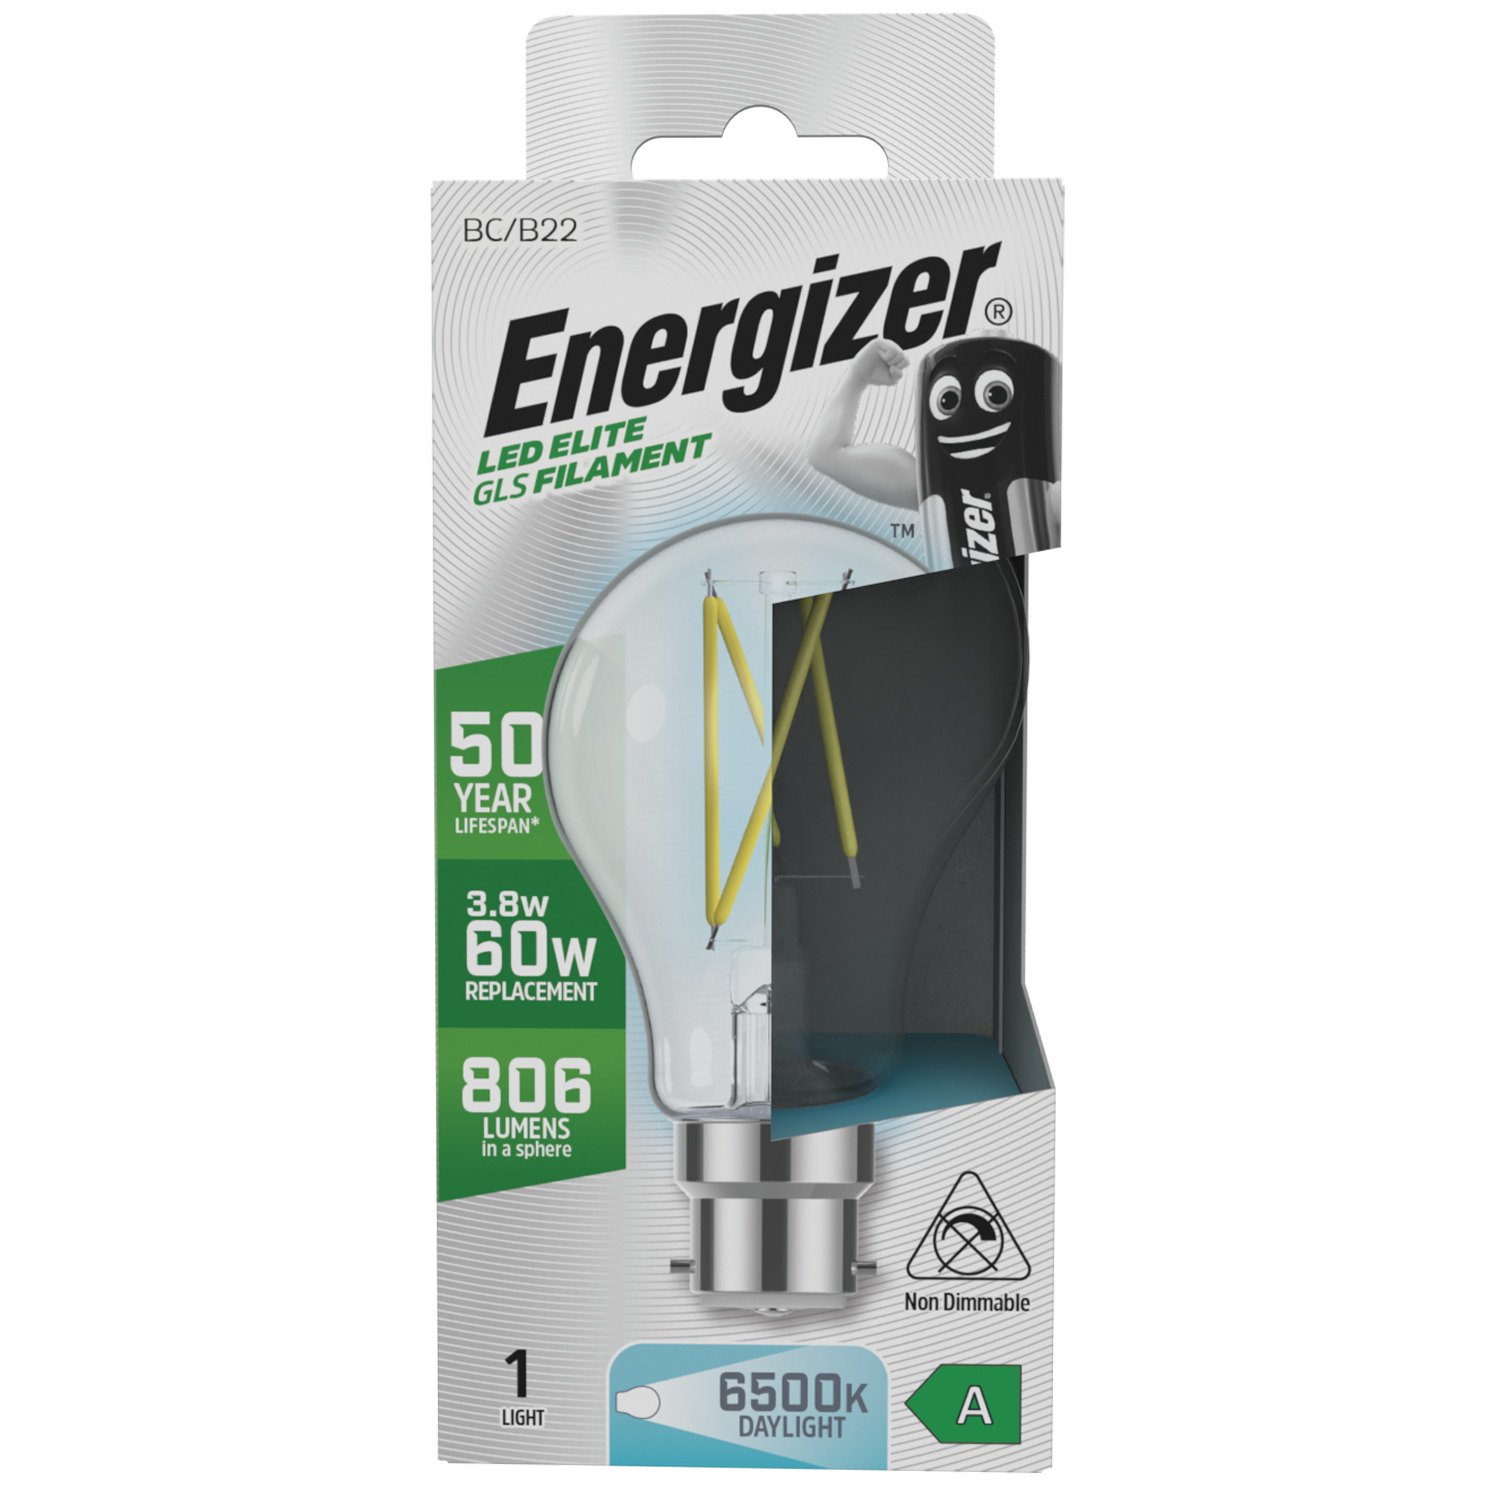 S29631 Energizer A Rated LED Elite GLS B22 Filament 806lm 3.8W 6500K (Daylight) - Box of 1